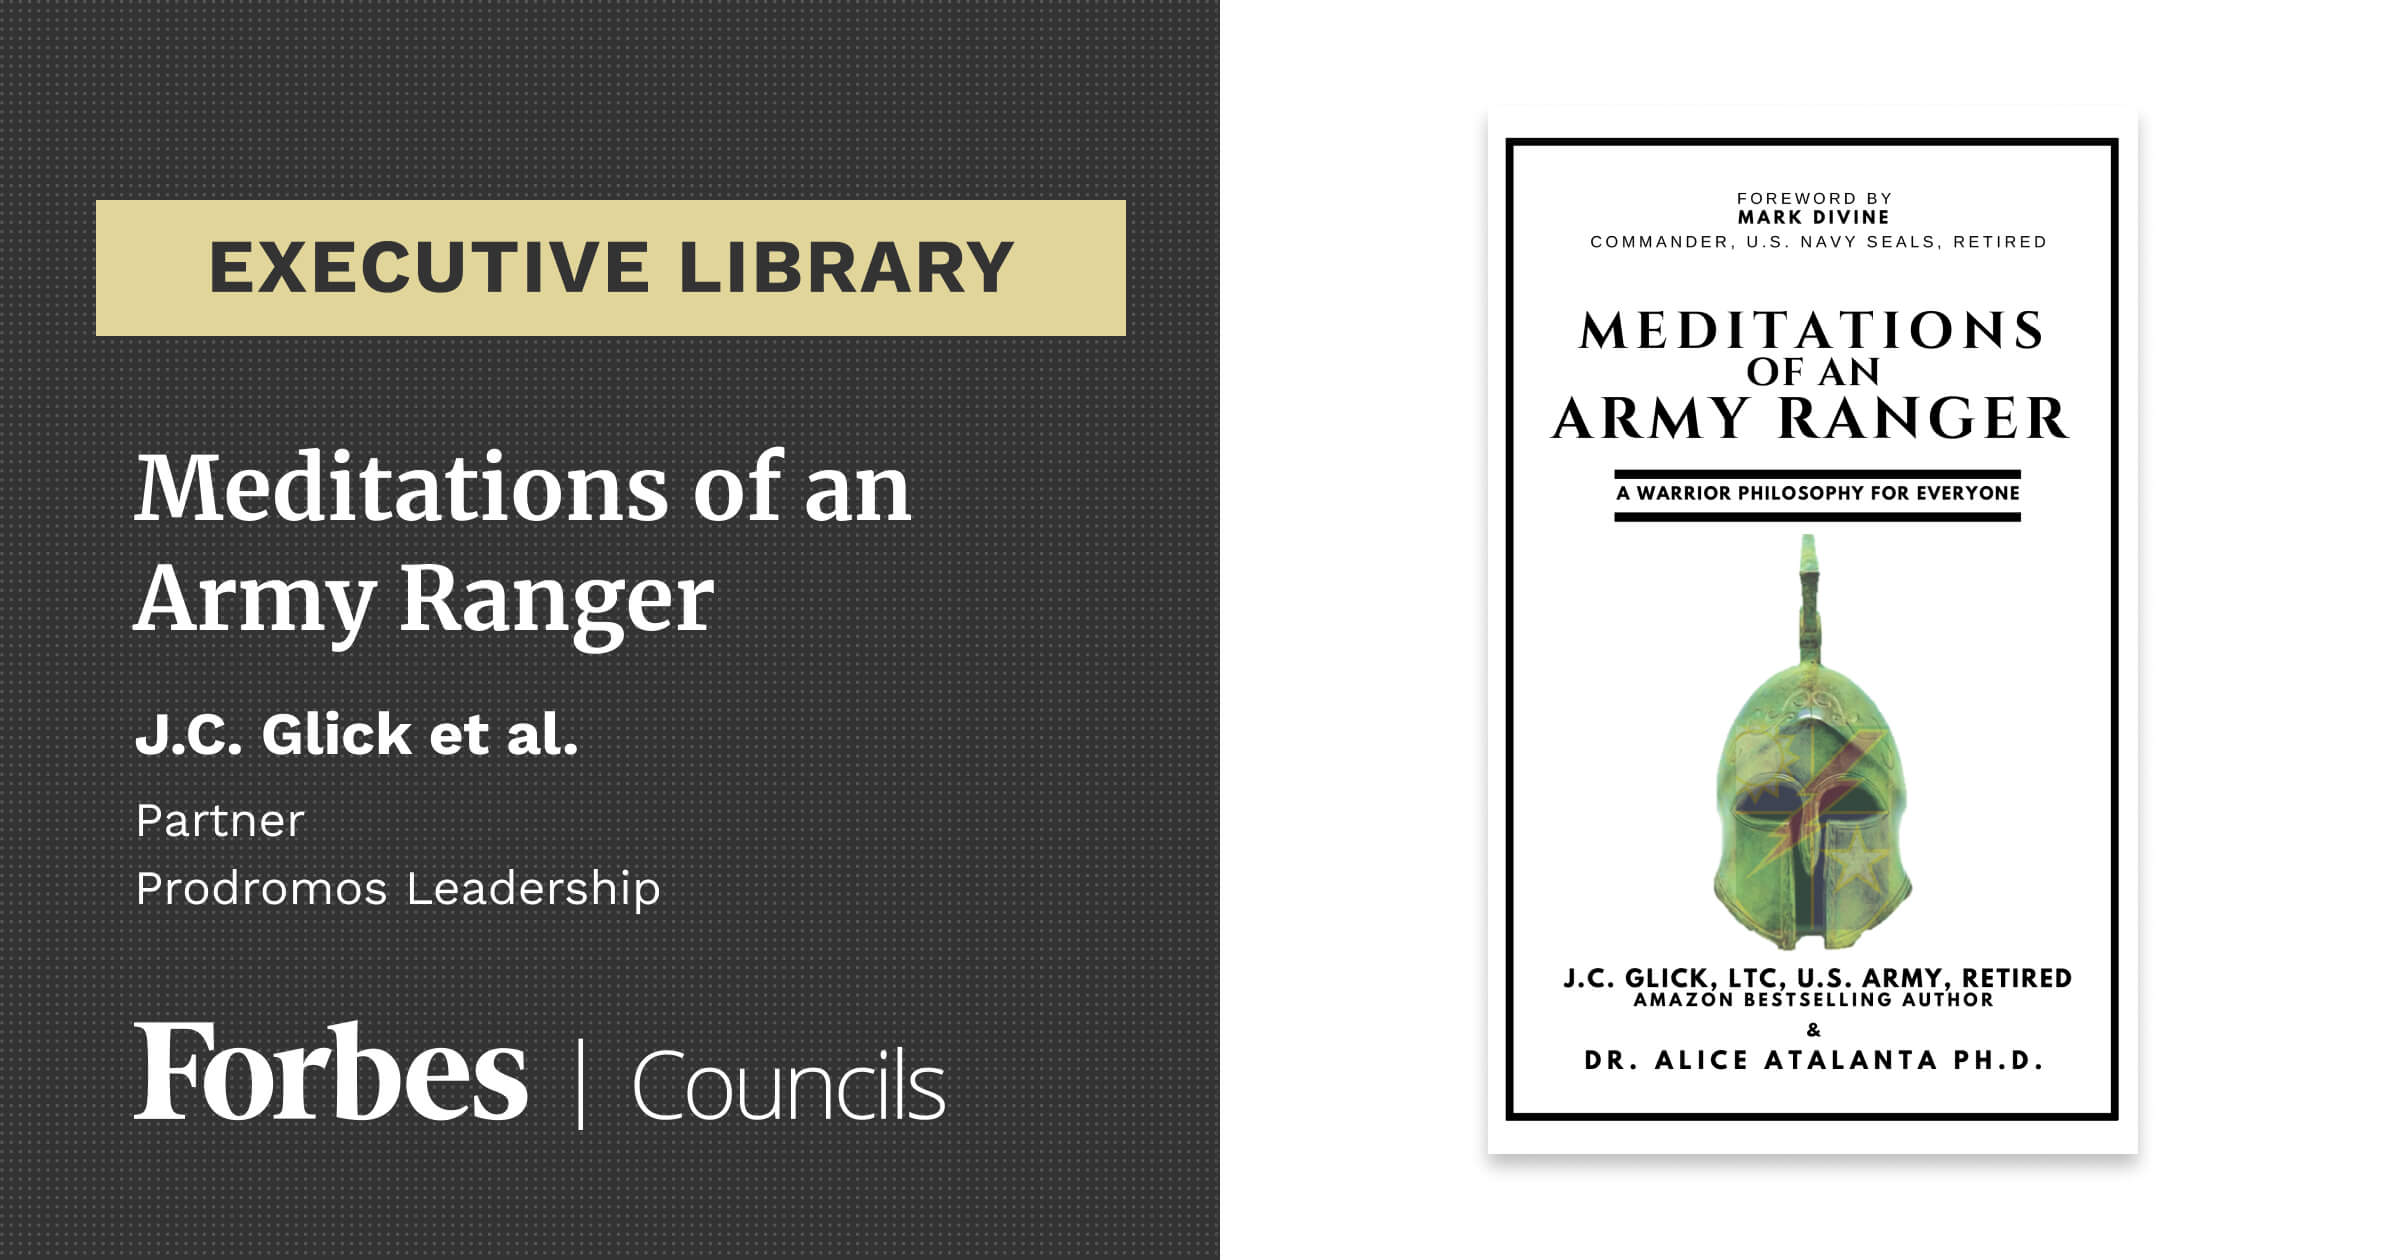 Meditations of an Army Ranger by J.C. Glick et al.